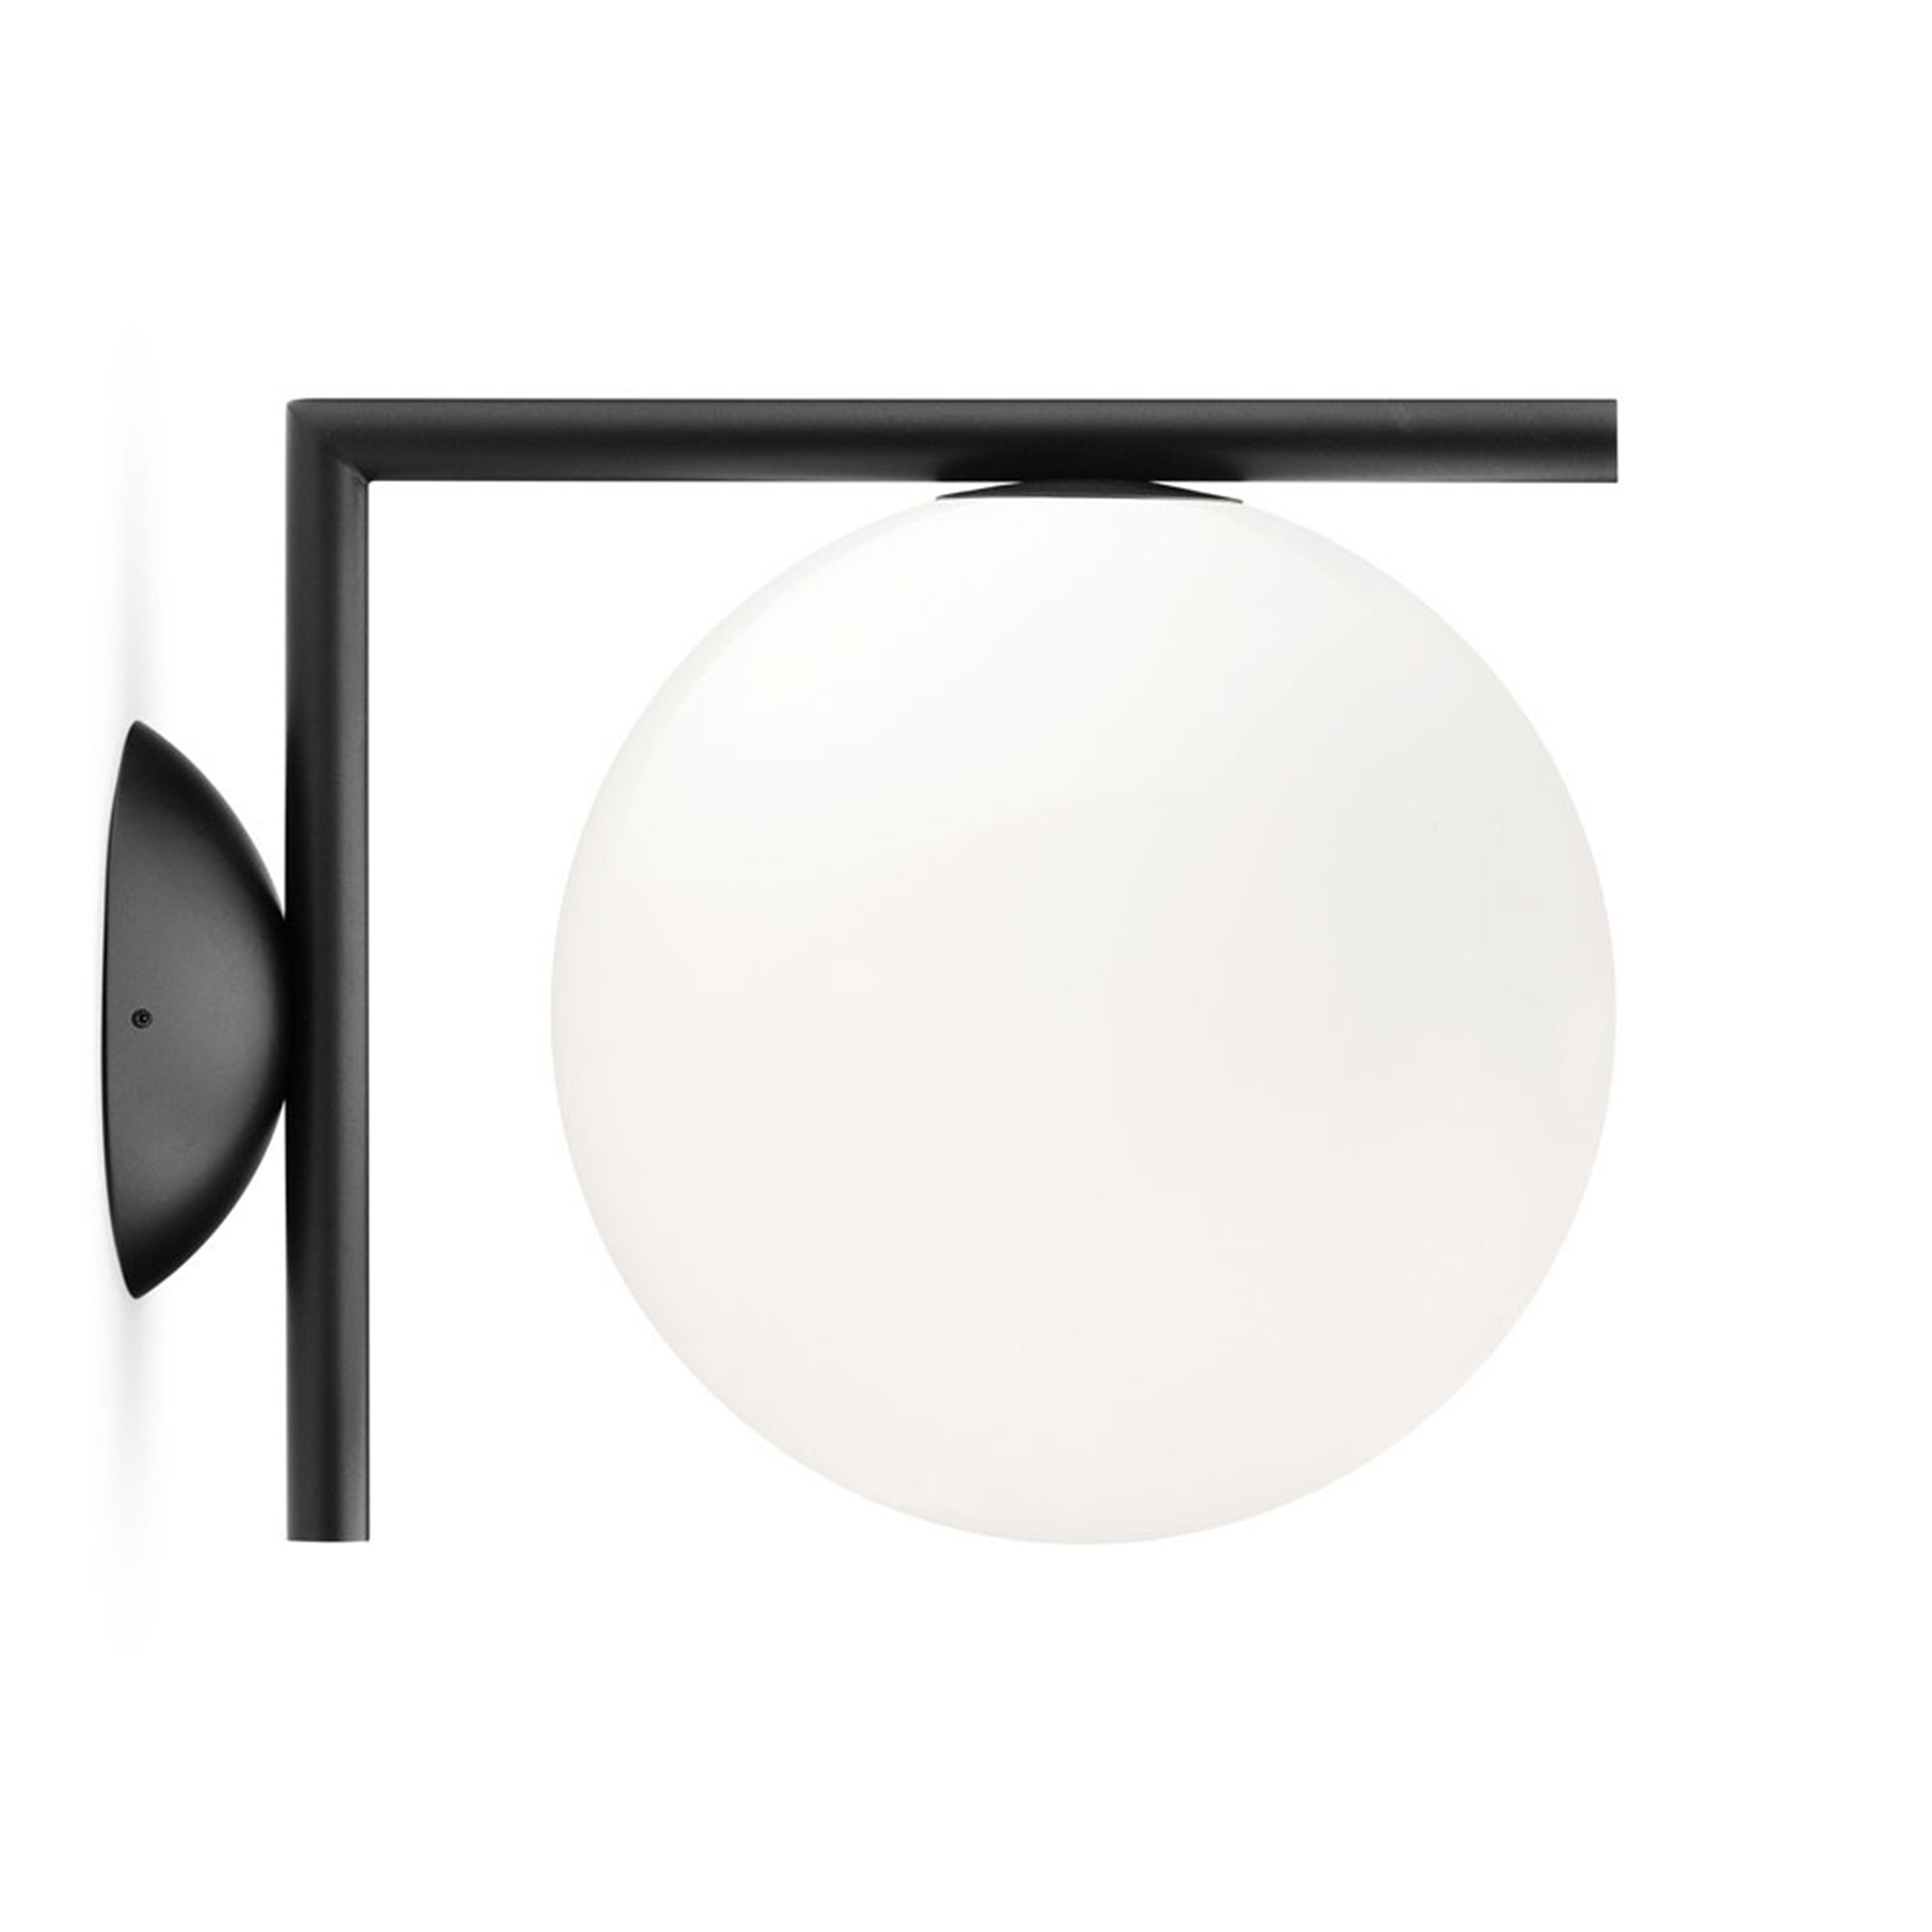 IC C/W 1 Outdoor by Michael Anastassiades for Flos